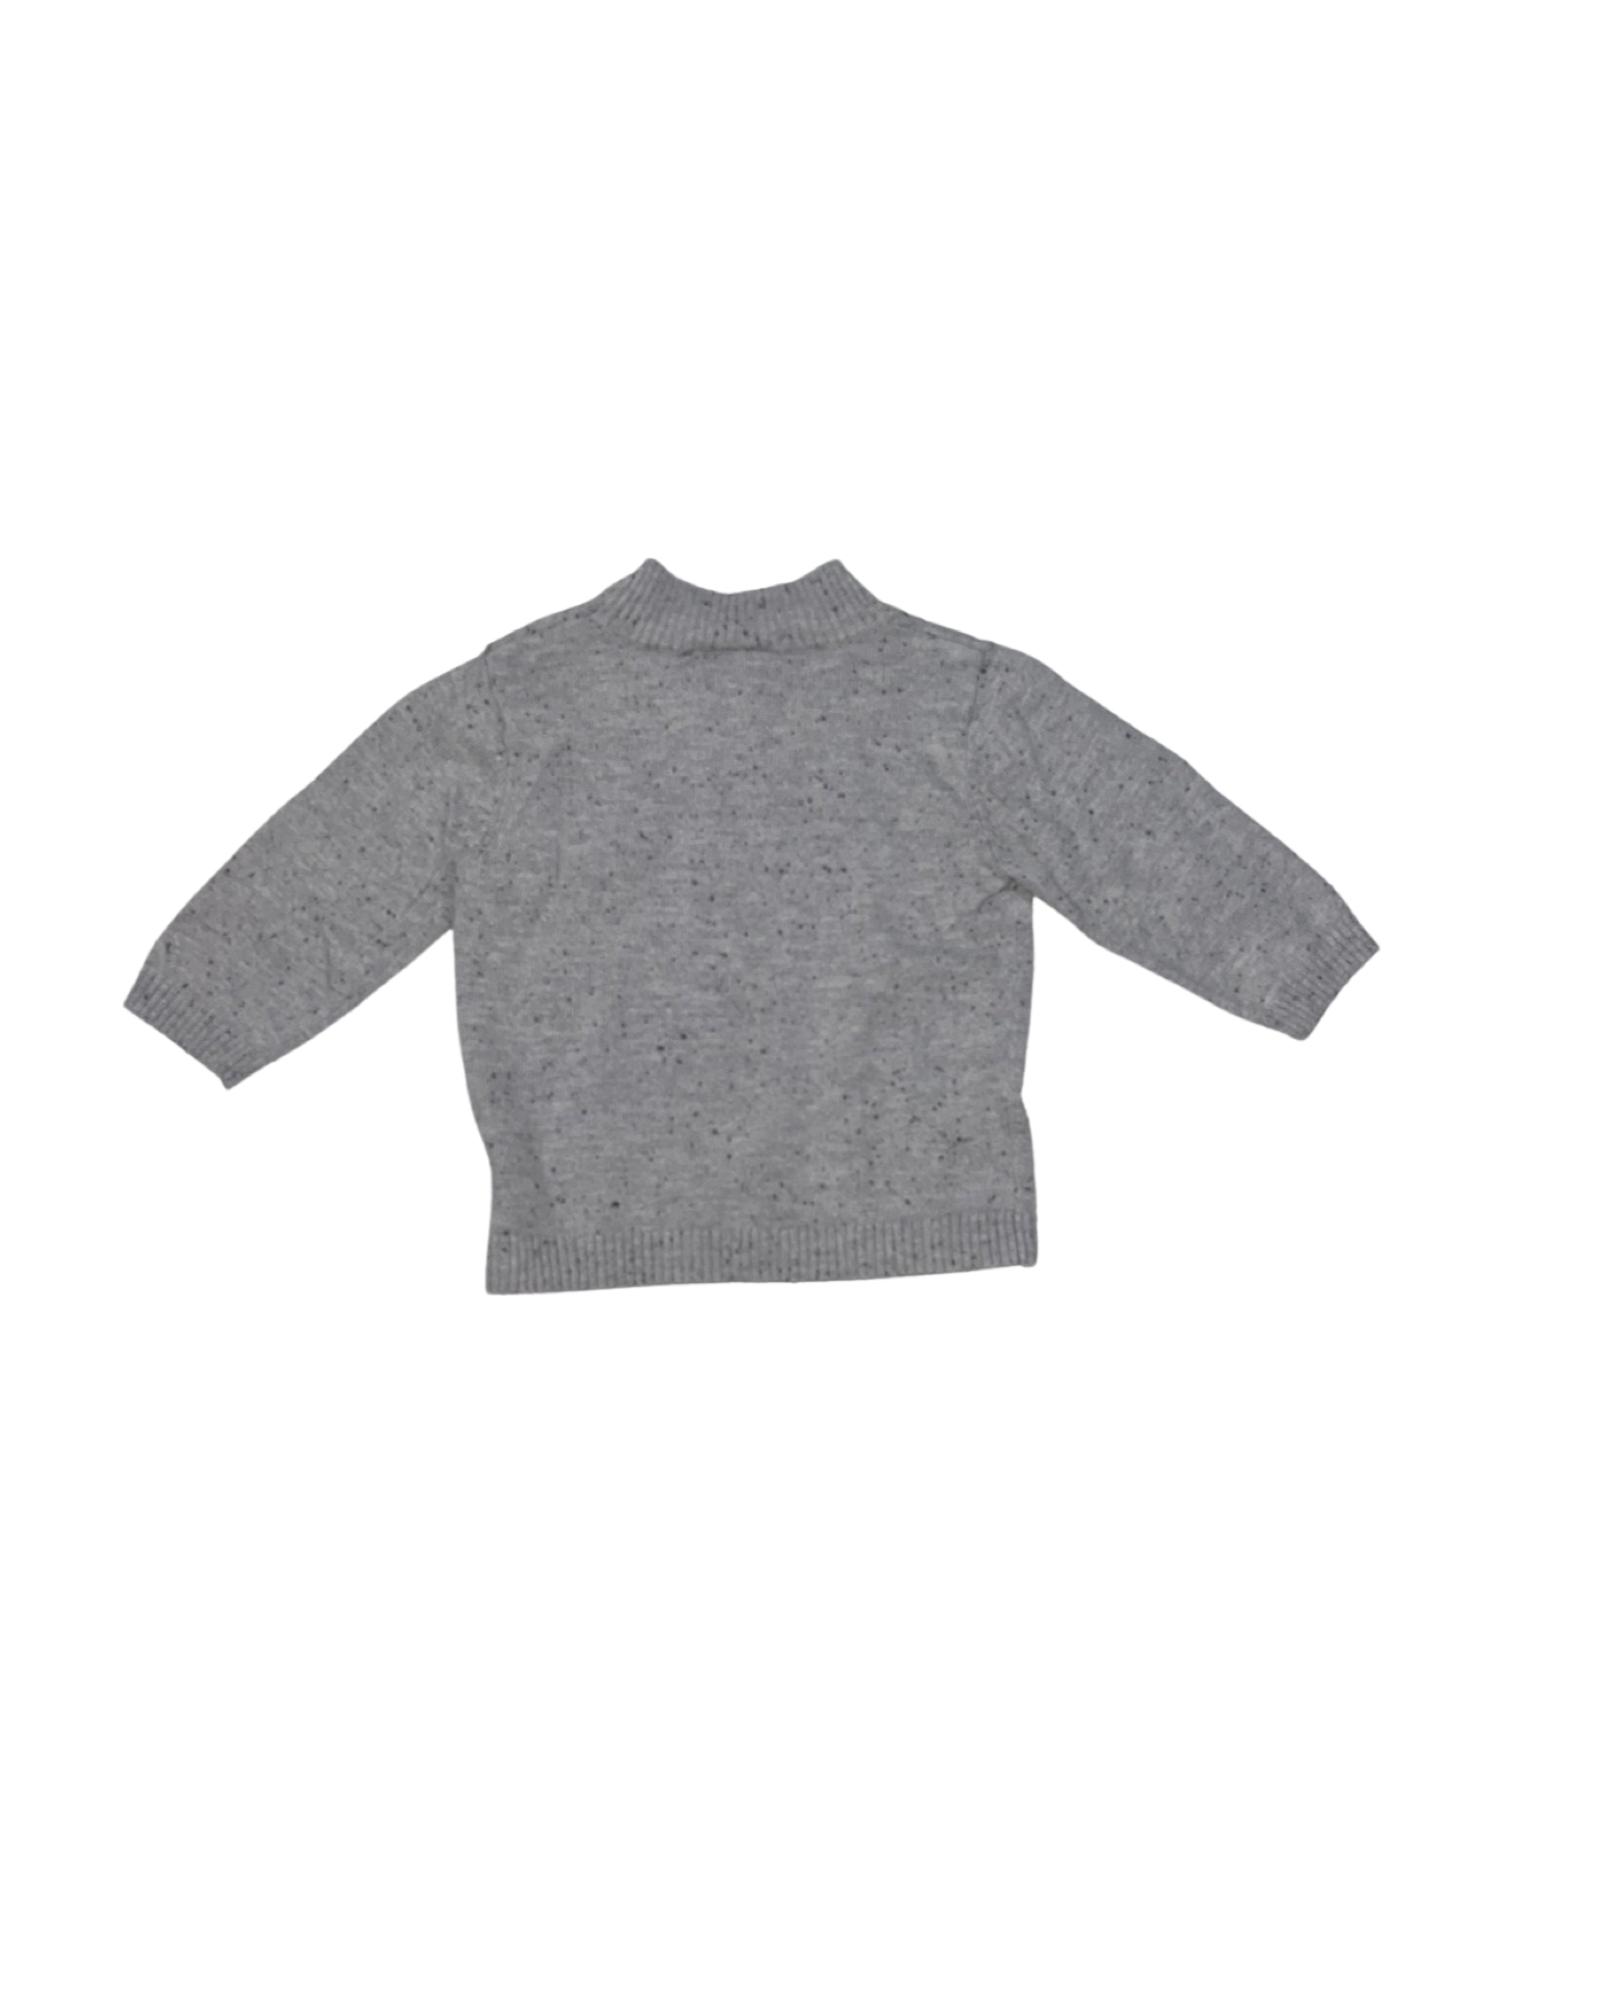 H&M Grey Sweater with Brown Patch (4-6M)